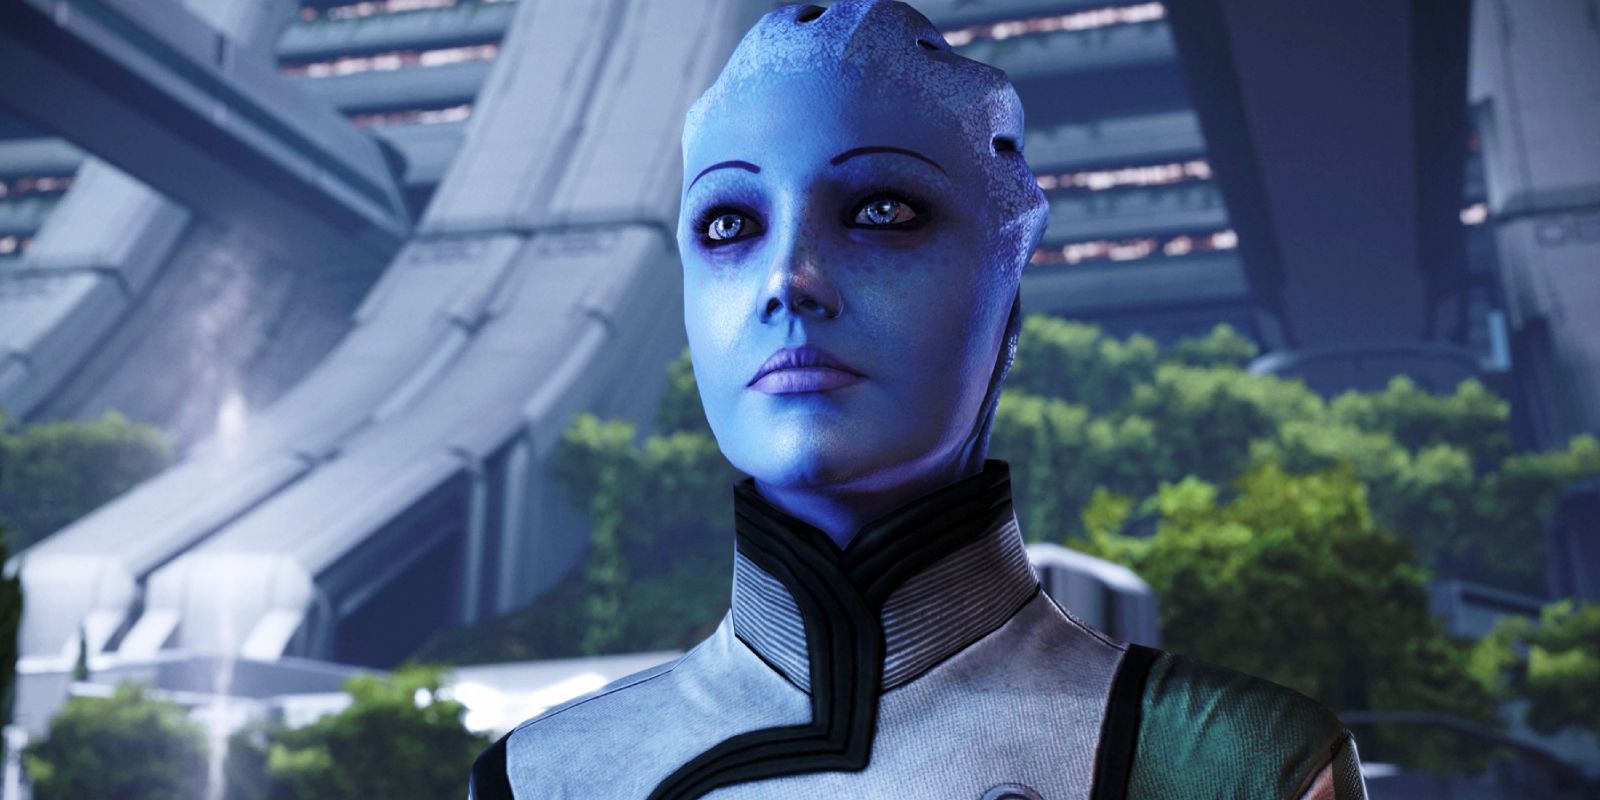 Liara is a beloved character from the Mass Effect series.